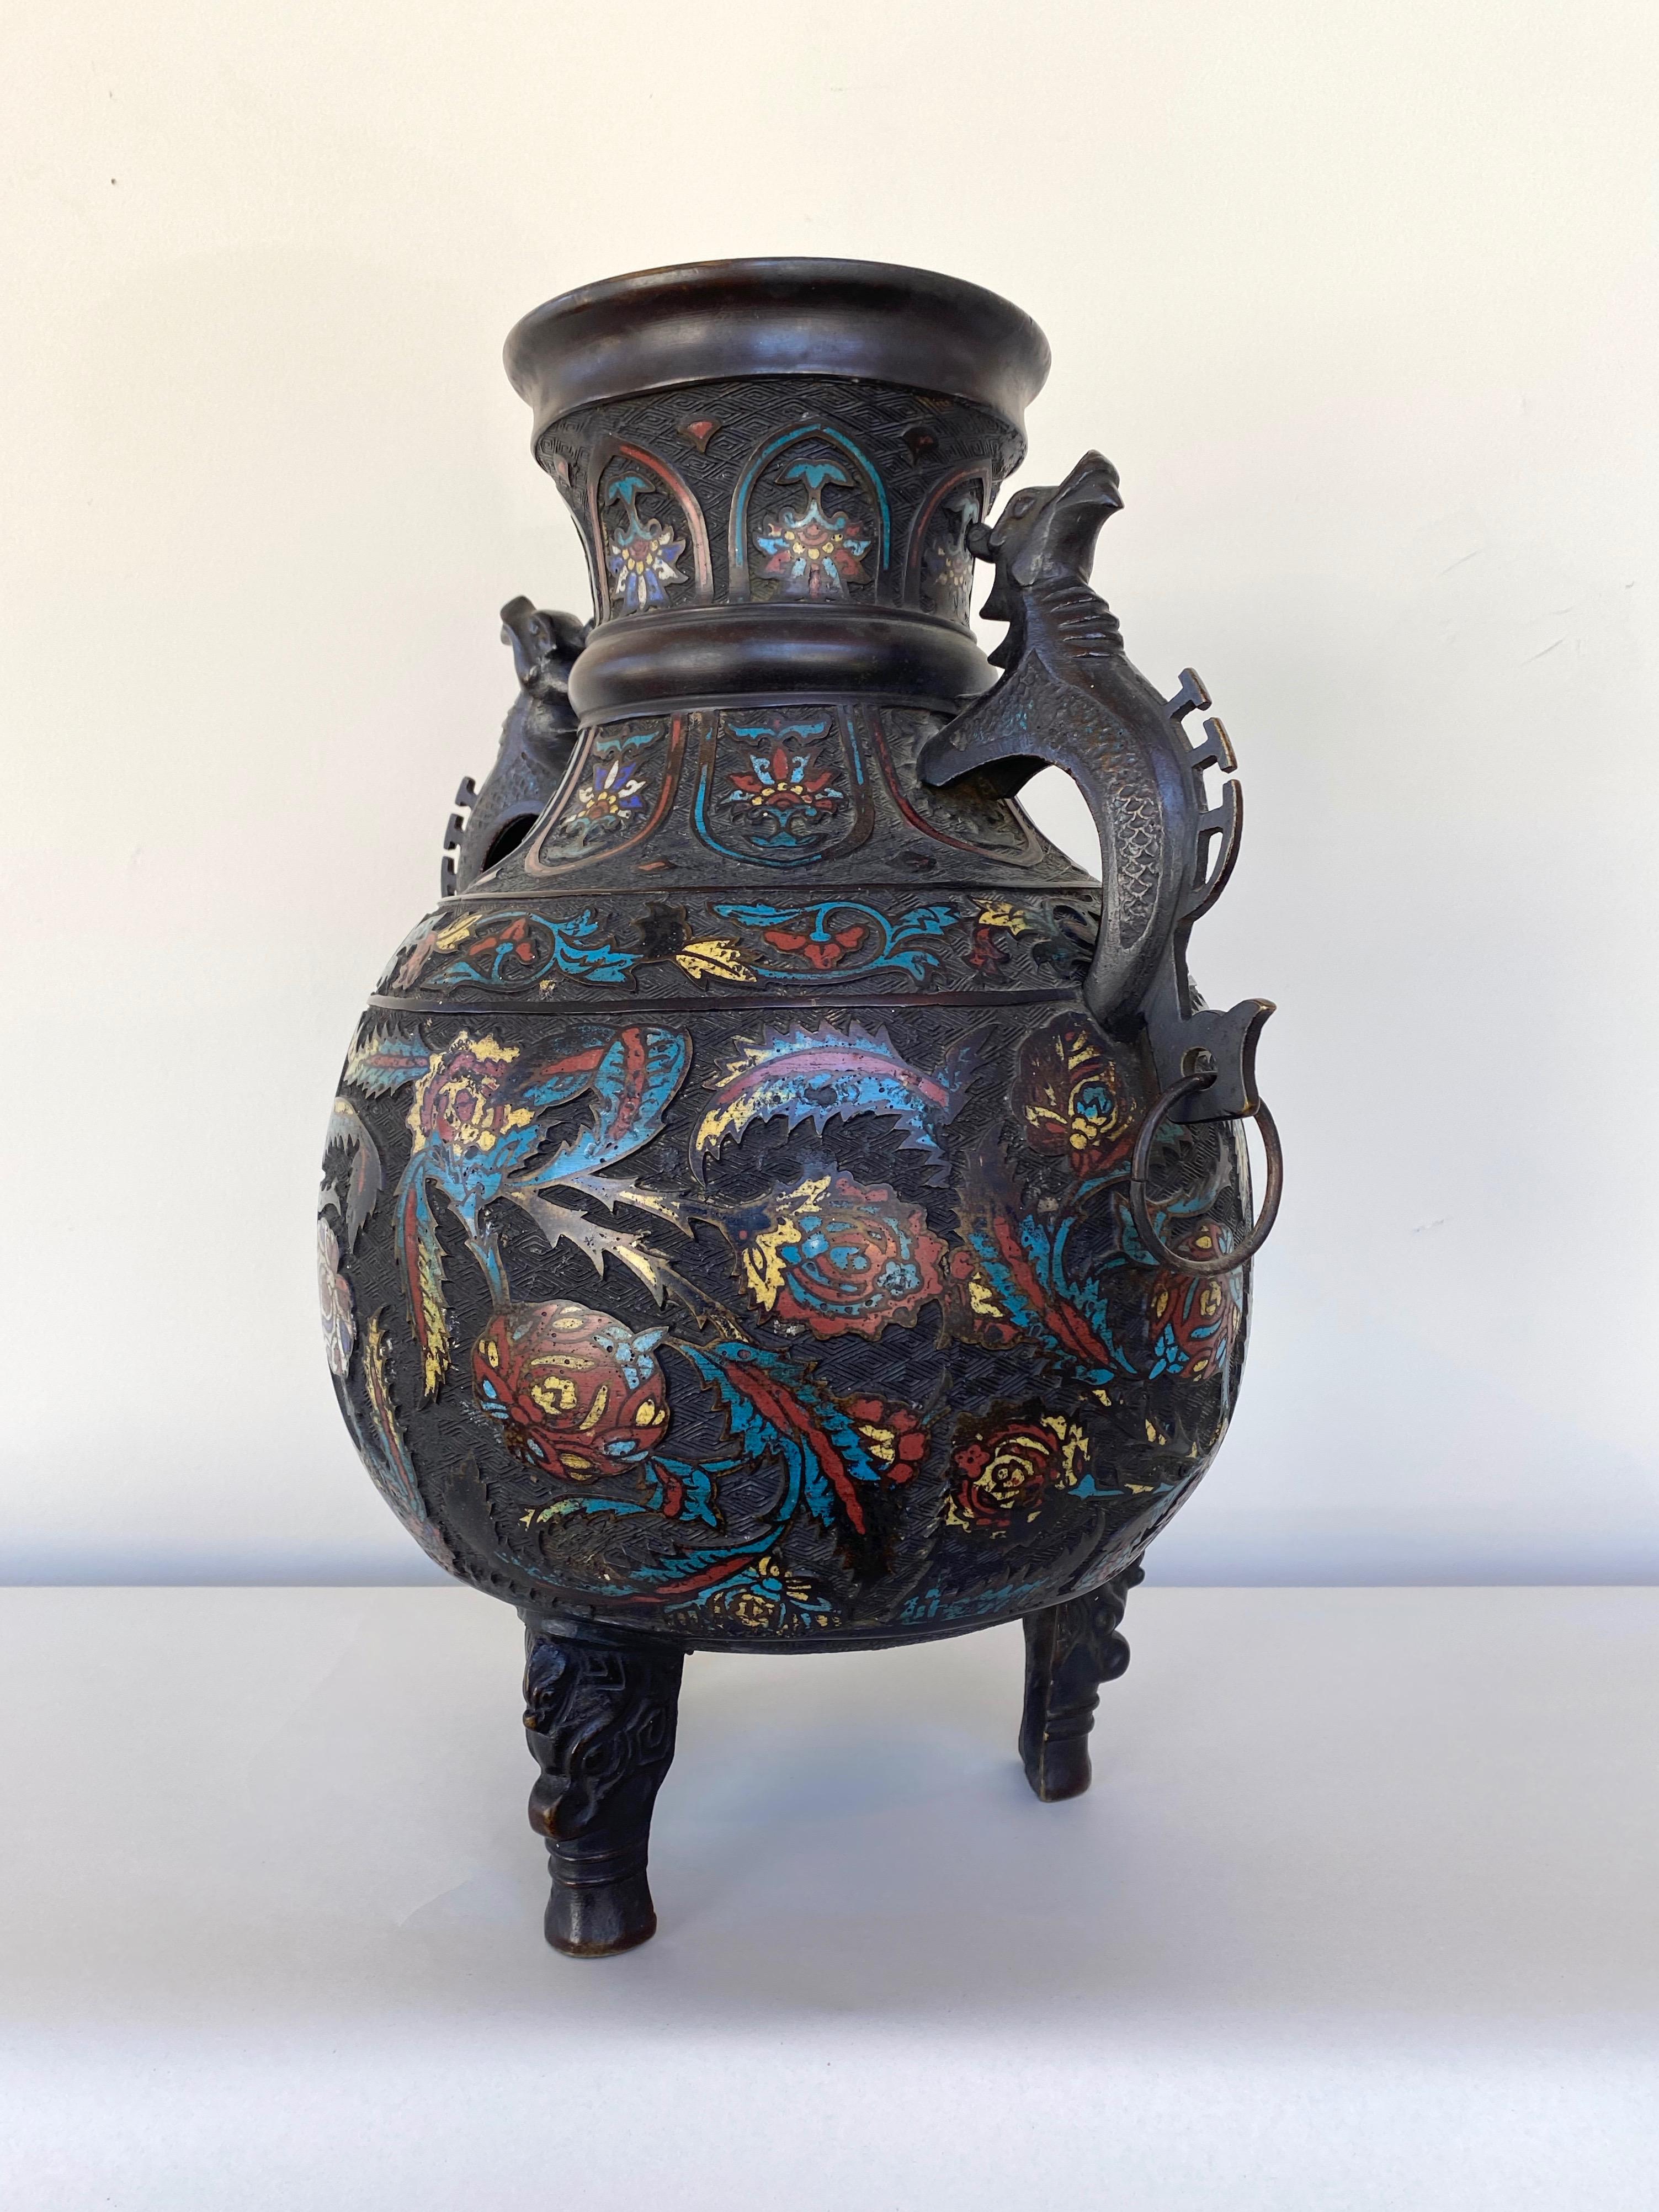 Cast Large Chinese Qing Dynasty Bronze Cloisonné Urn with Dragon Handles, 19th C.